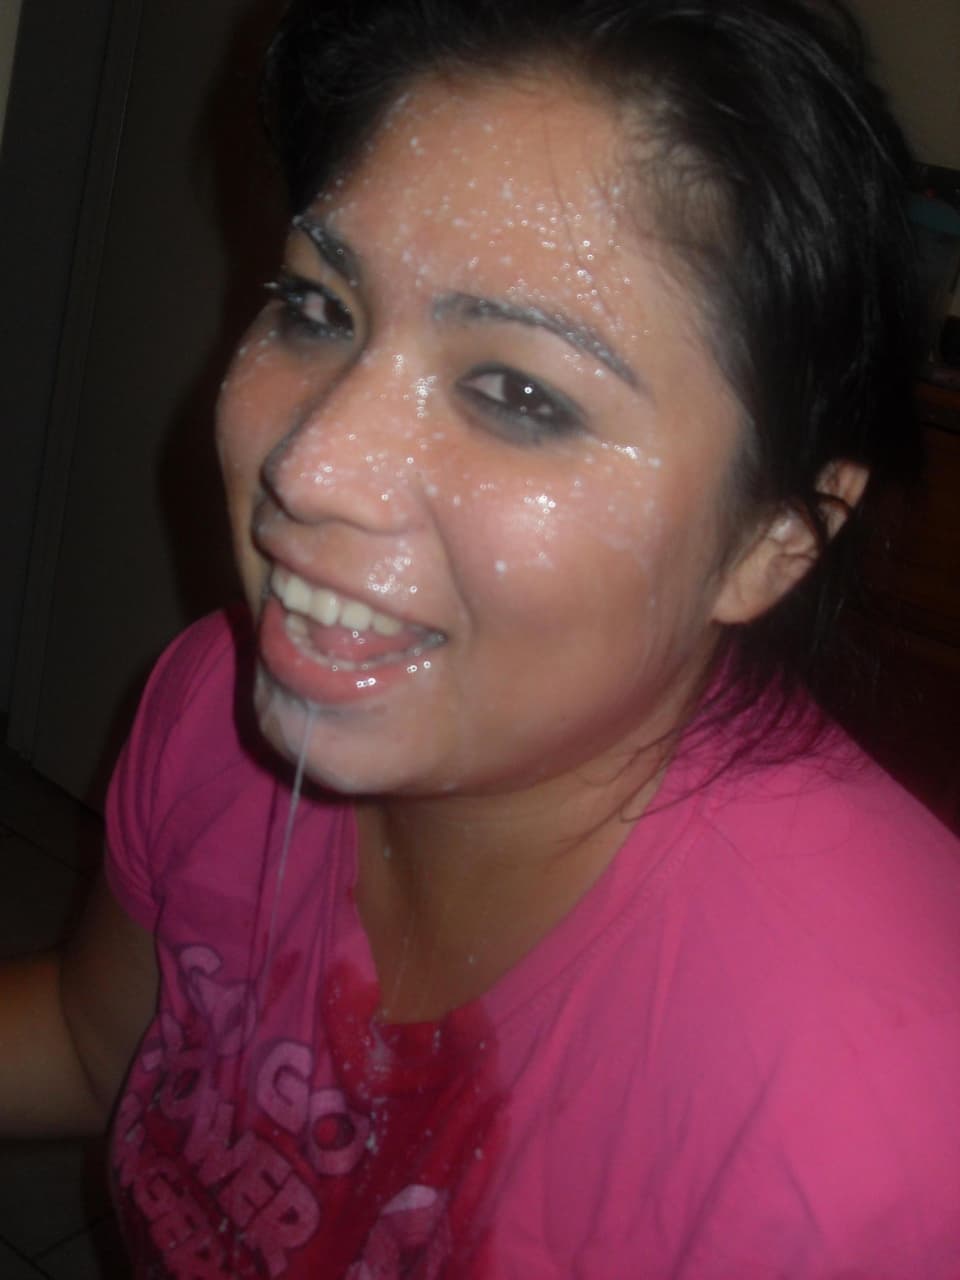 Asian amztuer facial cum shot Best adult photos at cums.gallery picture picture image